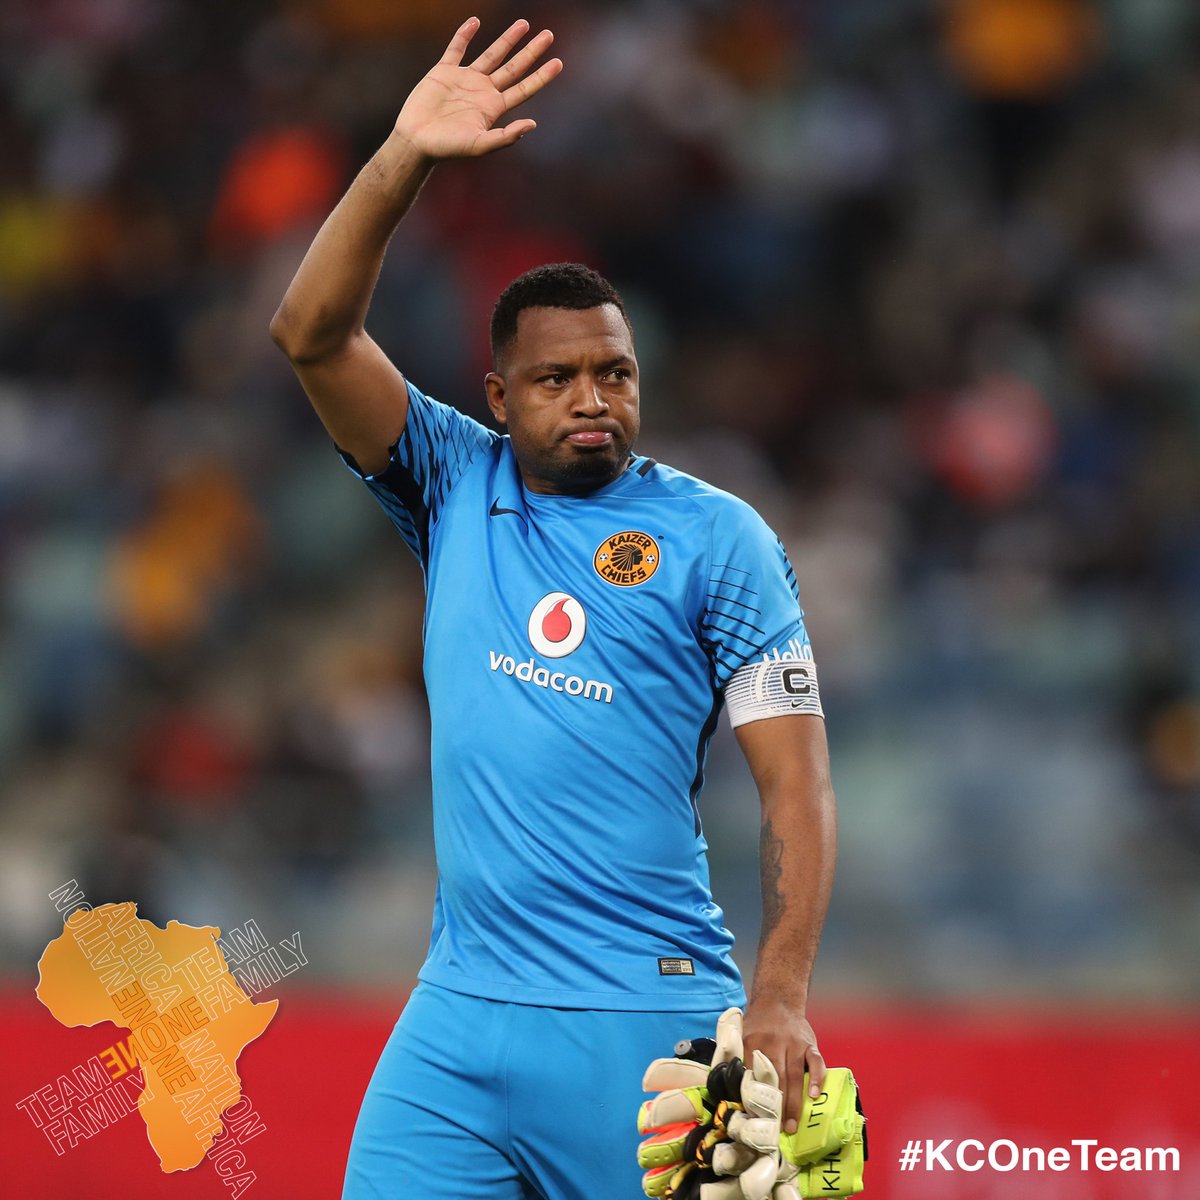 Itumeleng Khune is one of the best we've ever had here in South africa. Respect 👏🏾👏🏾👏🏾👏🏾.